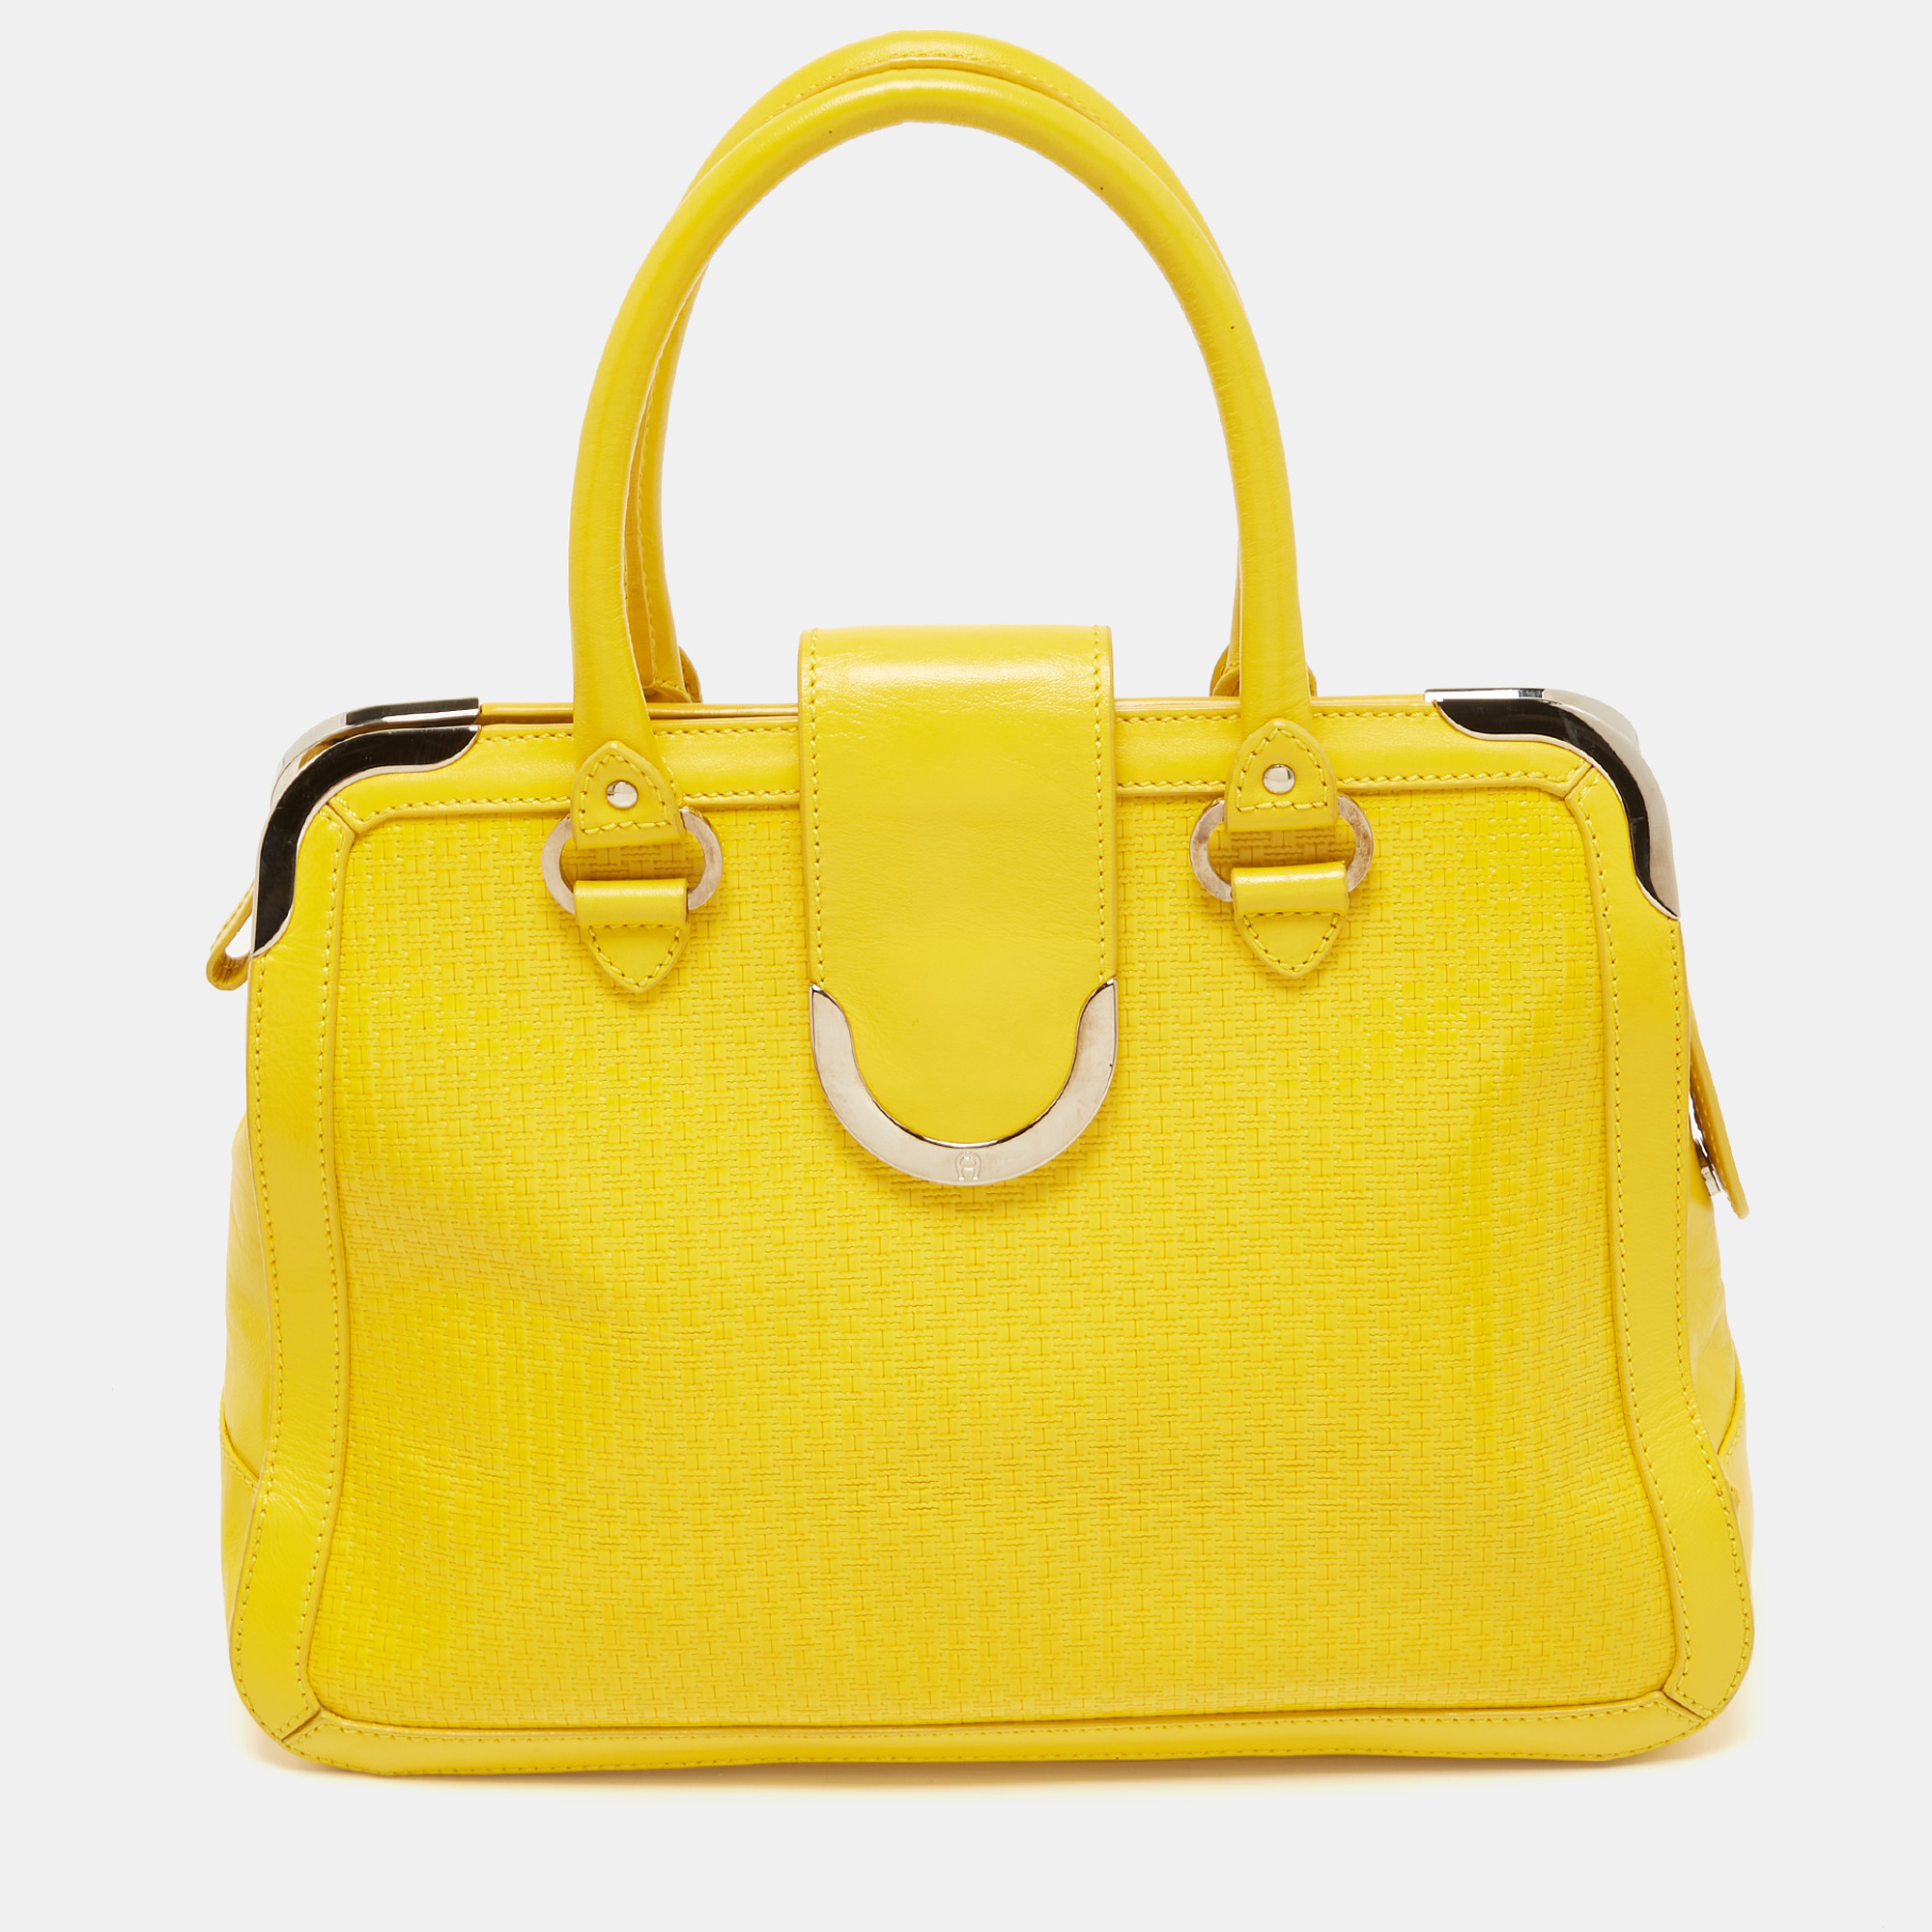 Pre-owned Aigner Yellow Woven Embossed Leather Flap Frame Satchel